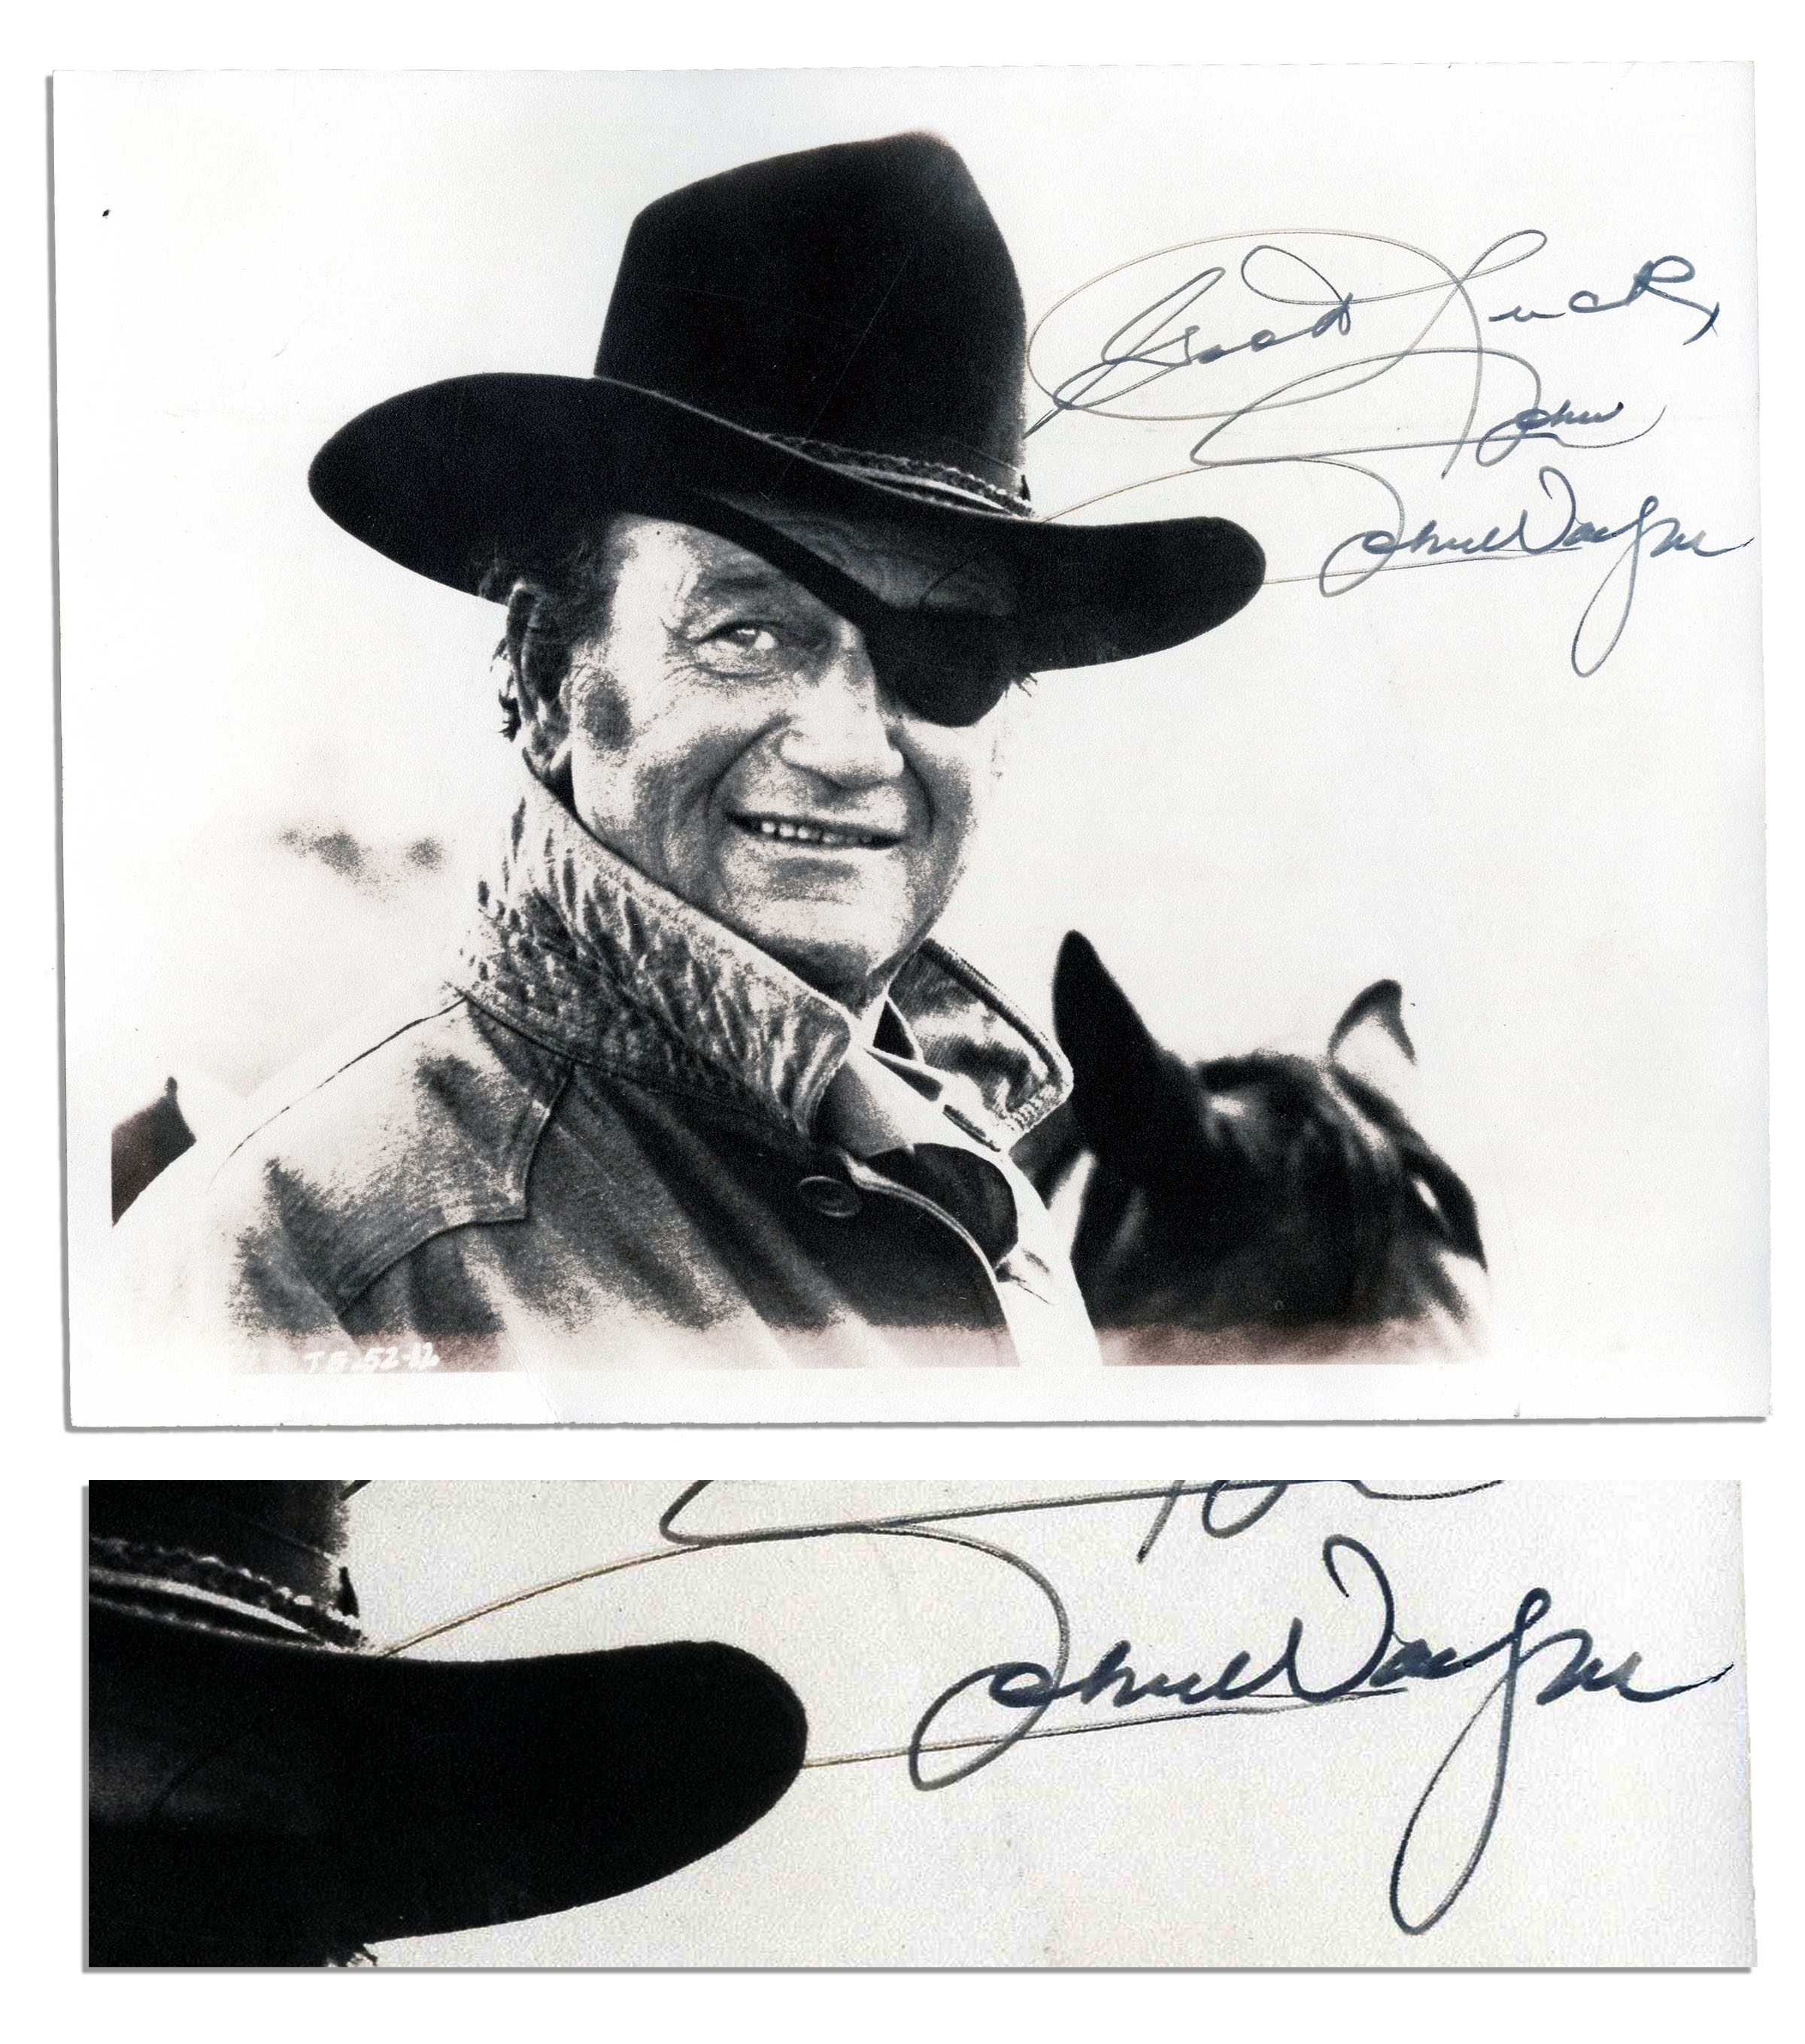 Sell Your John Wayne Autograph at Nate D. Sanders Auctions Today!